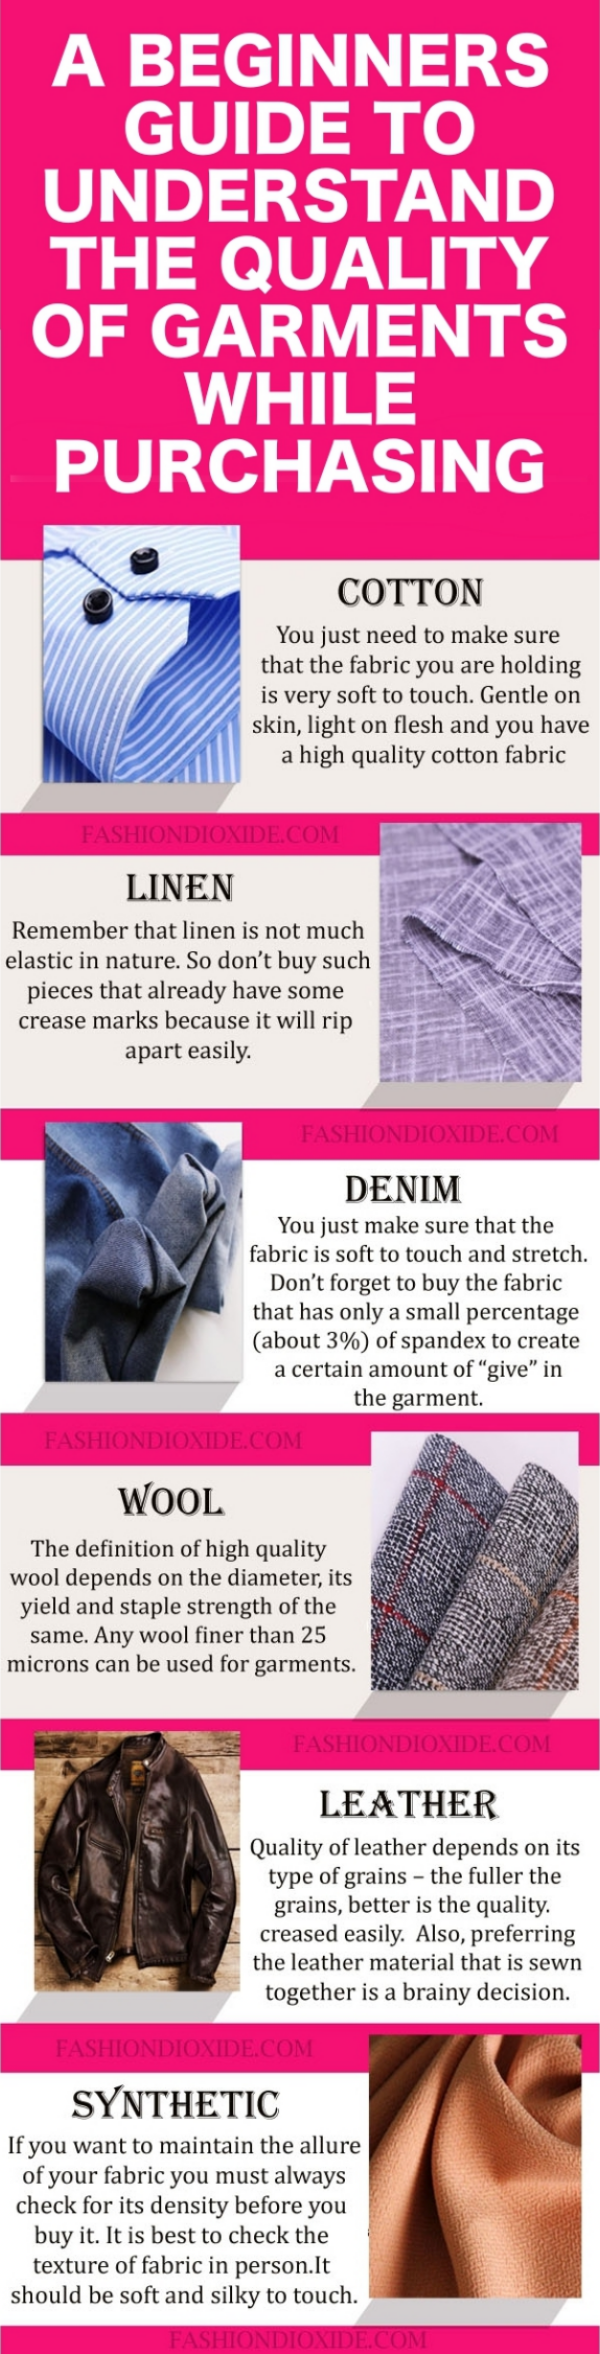 A-Beginners-Guide-to-Understand-the-Quality-ofGarments-While-Purchasing